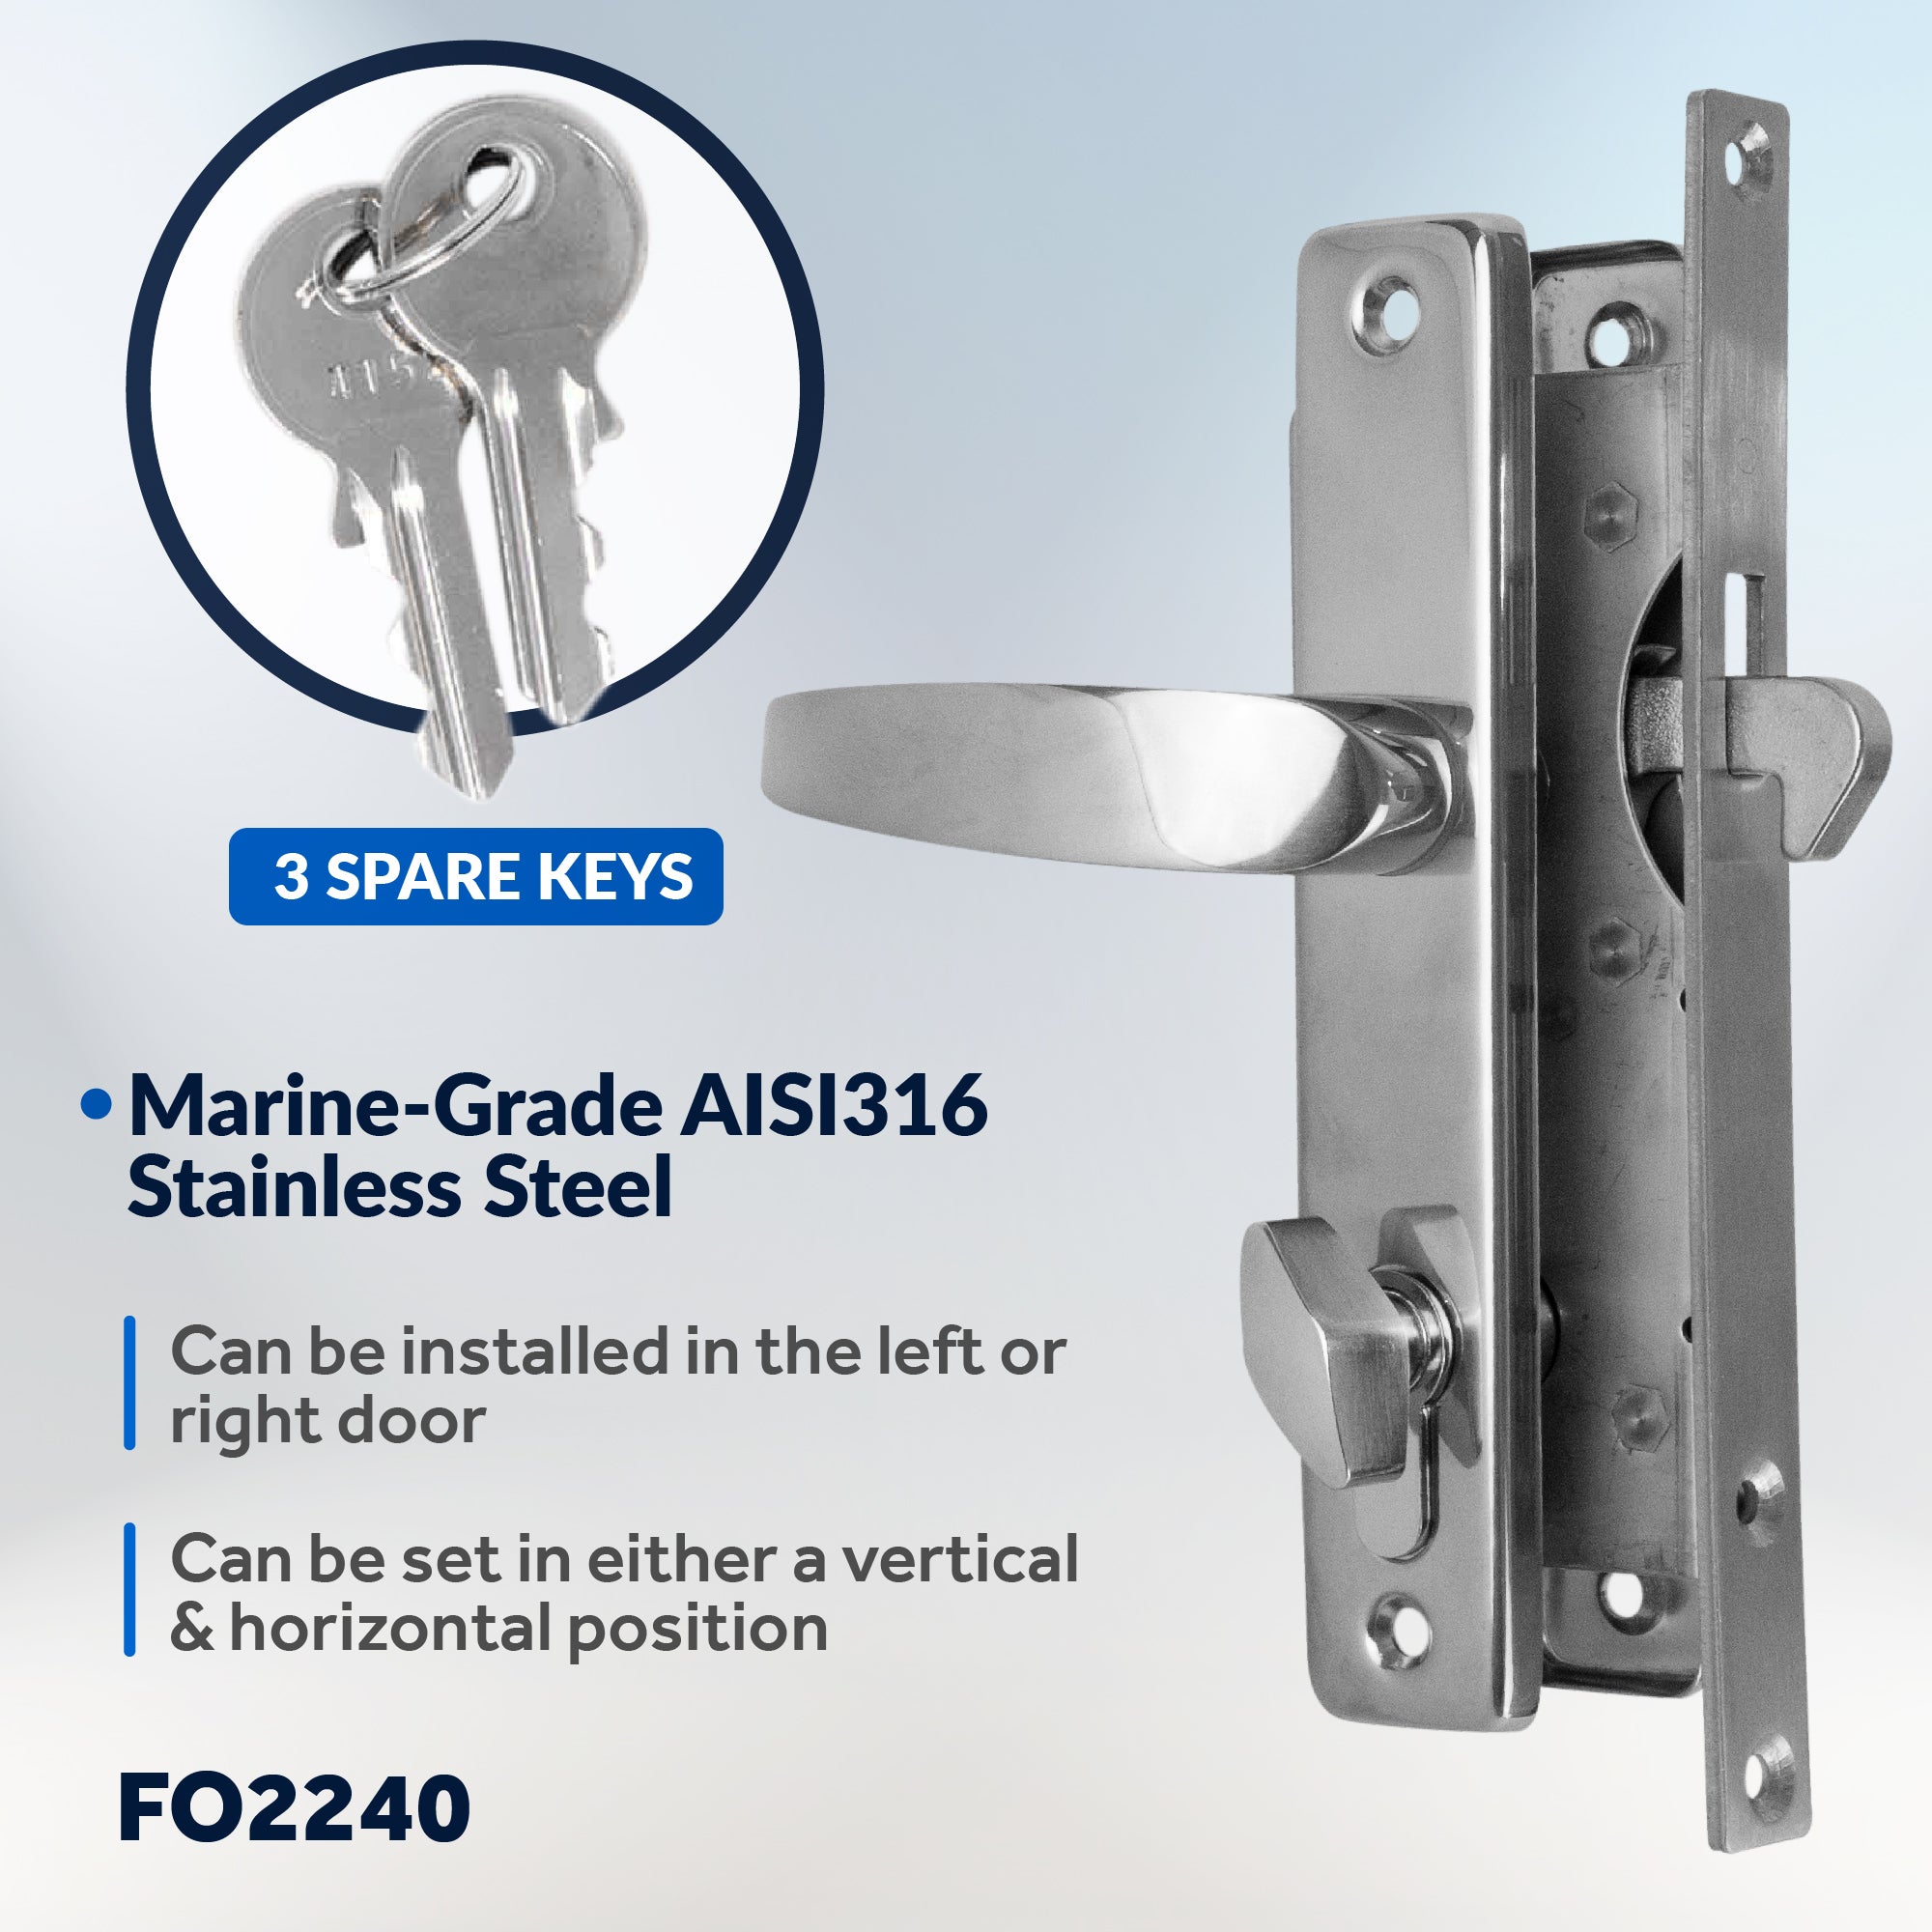 Sliding Door Mortise Latch with 3 Keys, Stainless Steel - FO2240